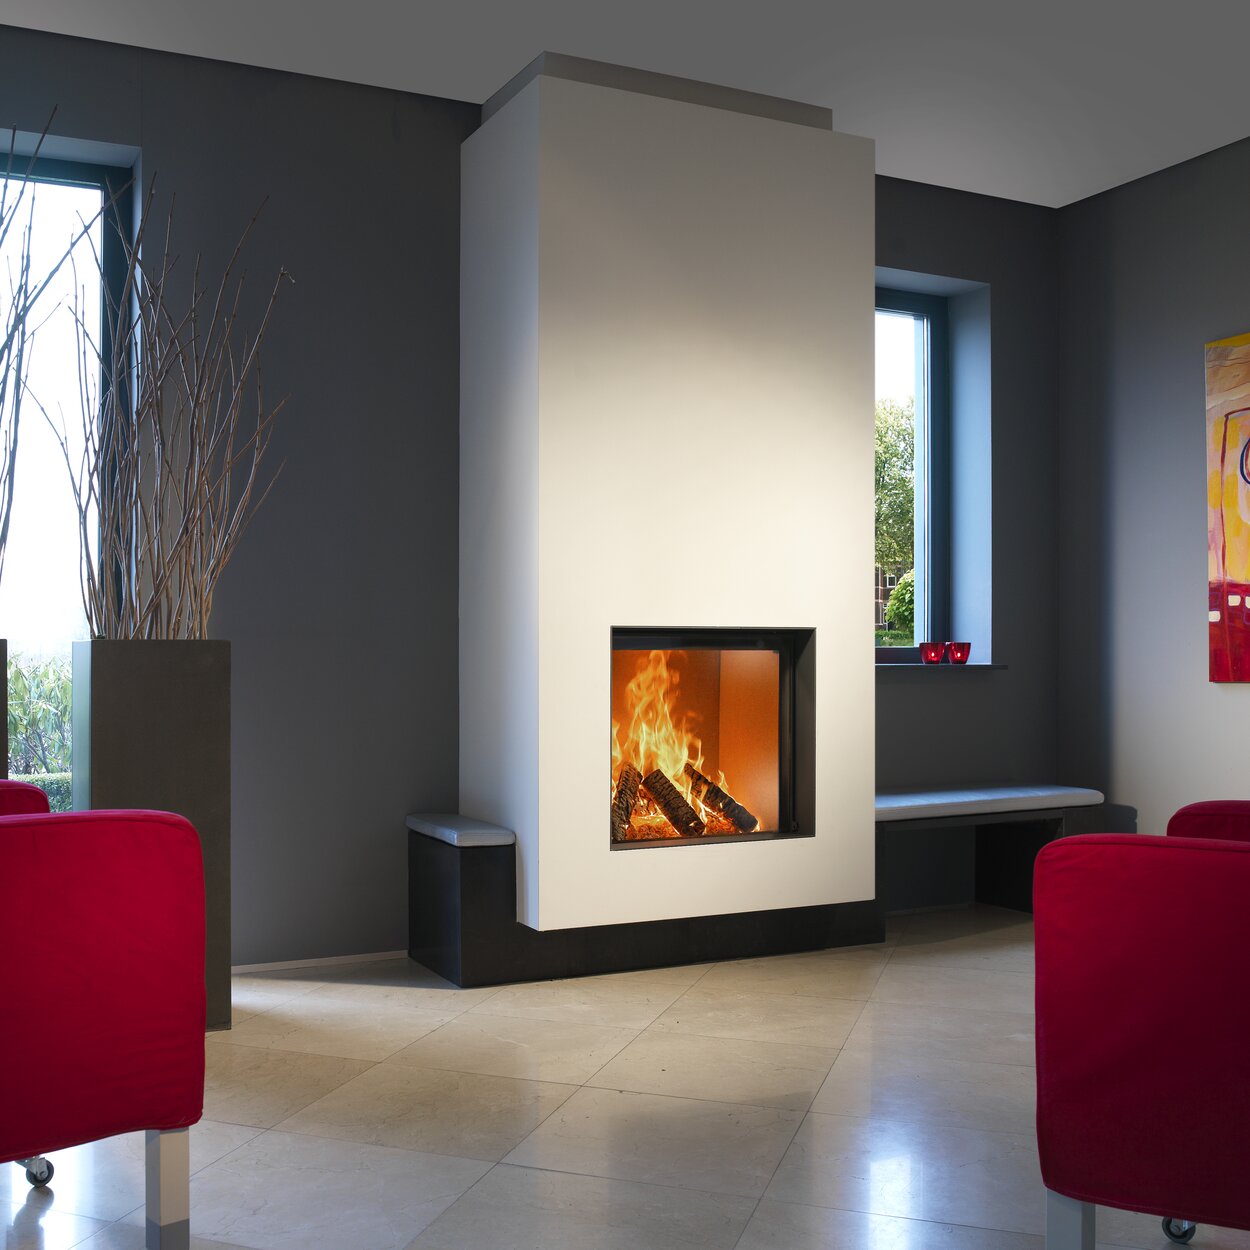 Wood fireplace W71/62F by Kalfire integrated into a white wall in a modern living room with grey walls and red furniture